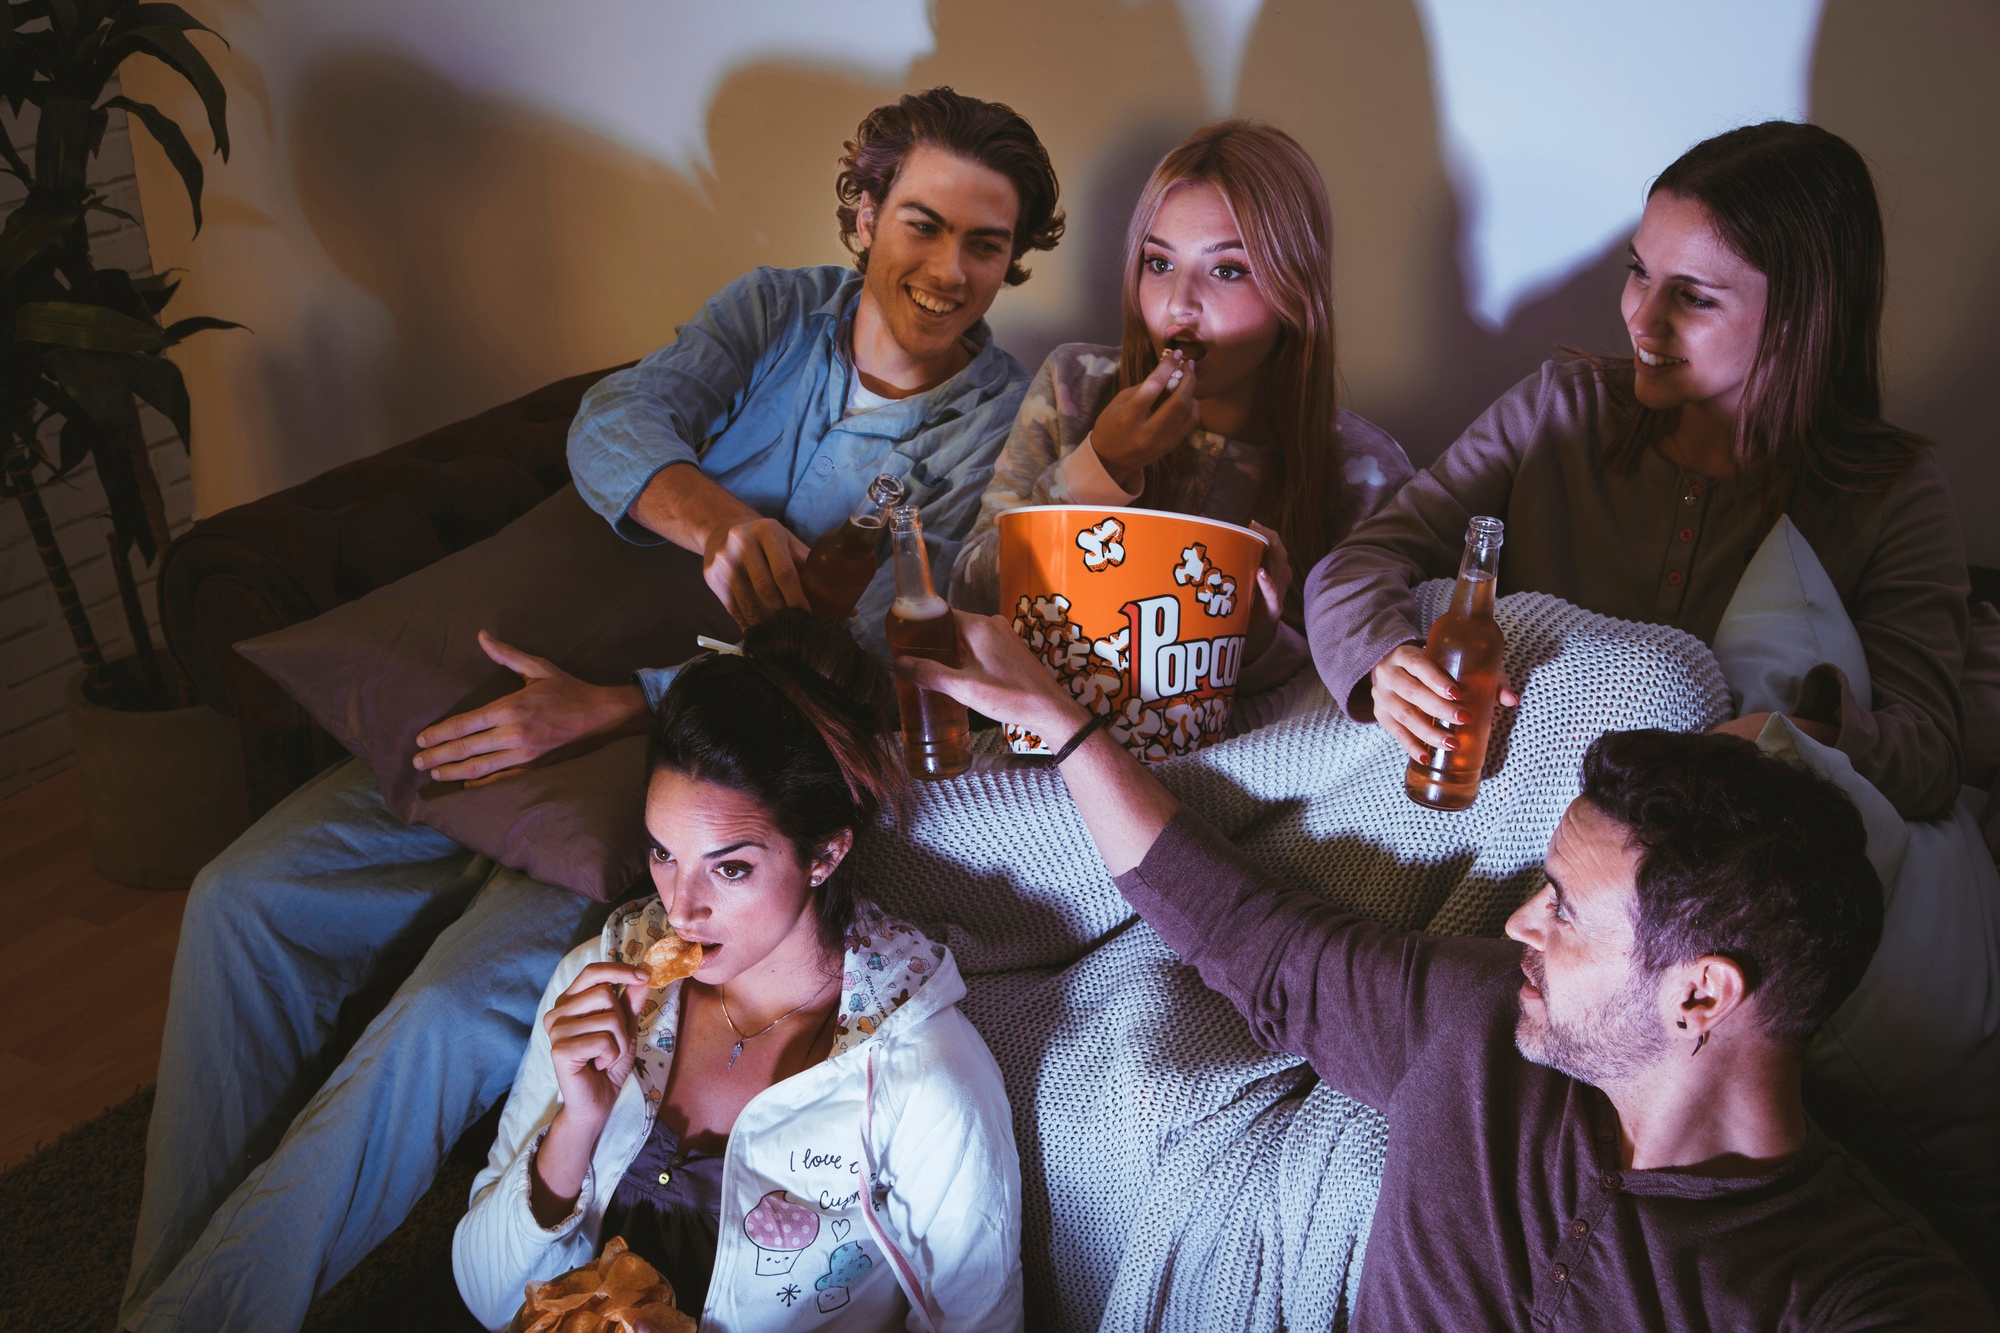 A group of friends enjoying snacks and drinks together during a movie night, sharing a cozy and cheerful atmosphere.